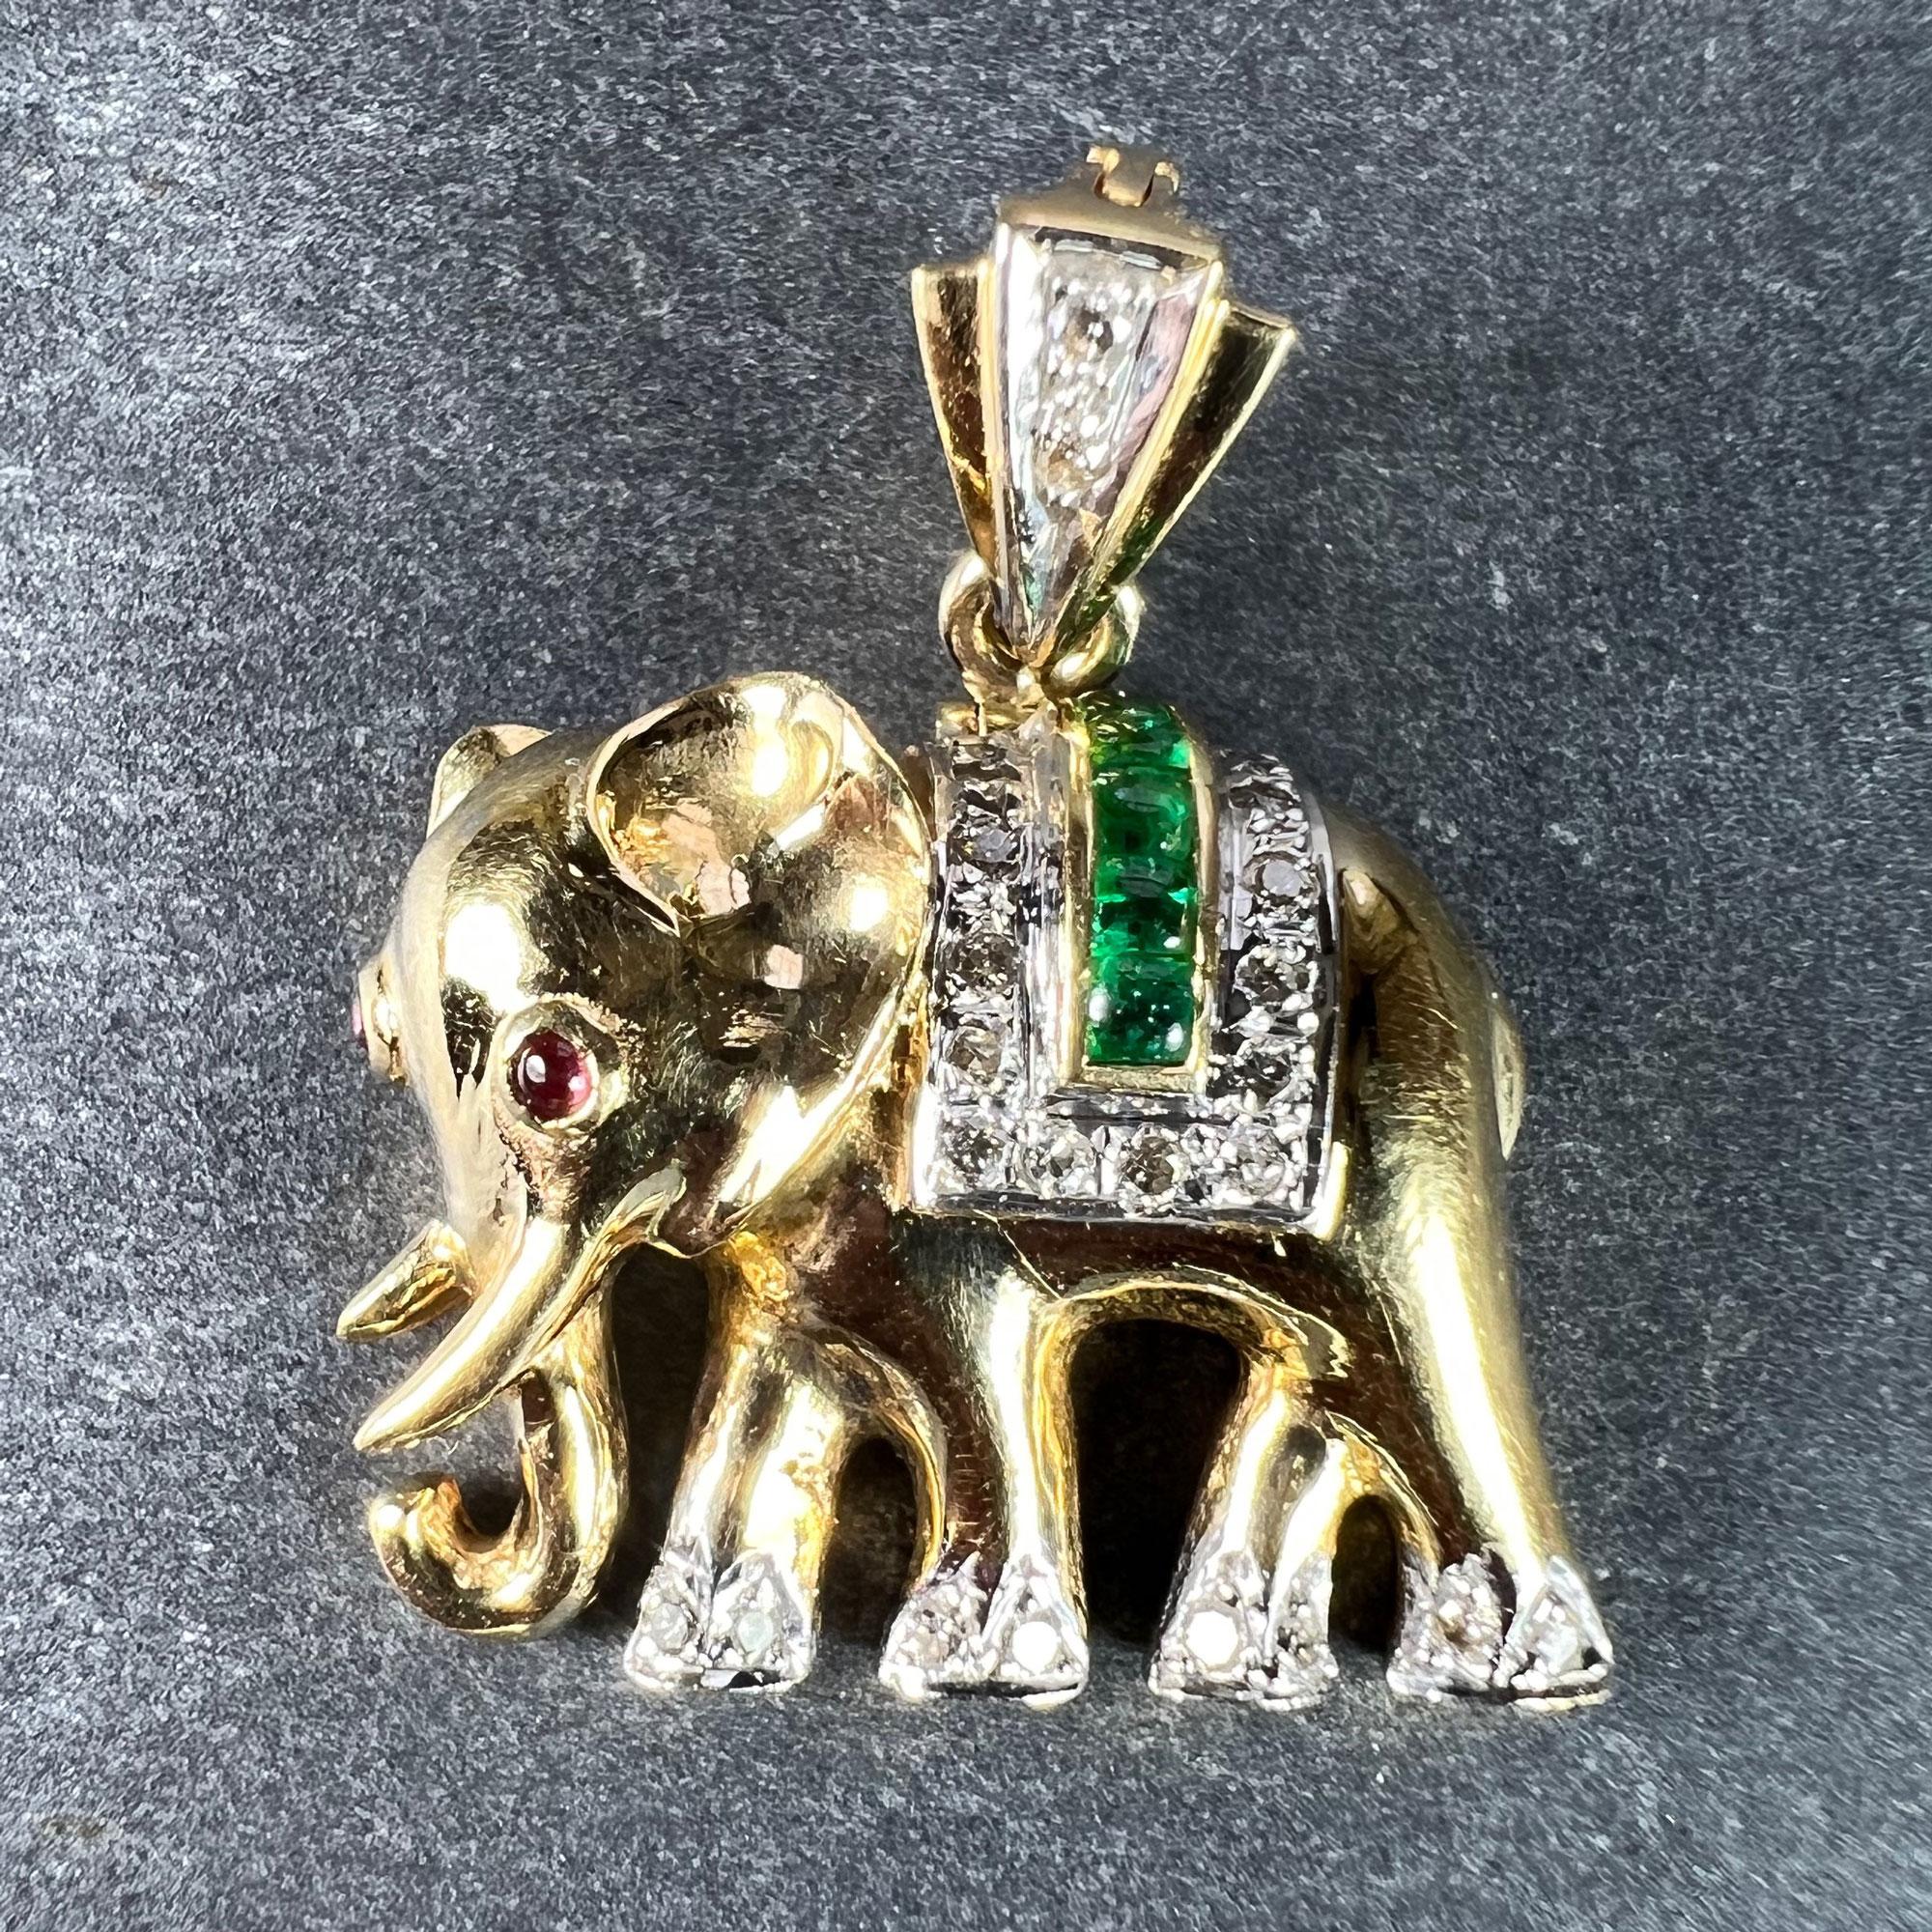 A French 18 karat (18K) yellow and white gold charm pendant designed as a lucky elephant with ruby eyes and diamond feet, with an emerald and diamond blanket over its back. The pendant bail in yellow and white gold with diamond detail. Stamped with